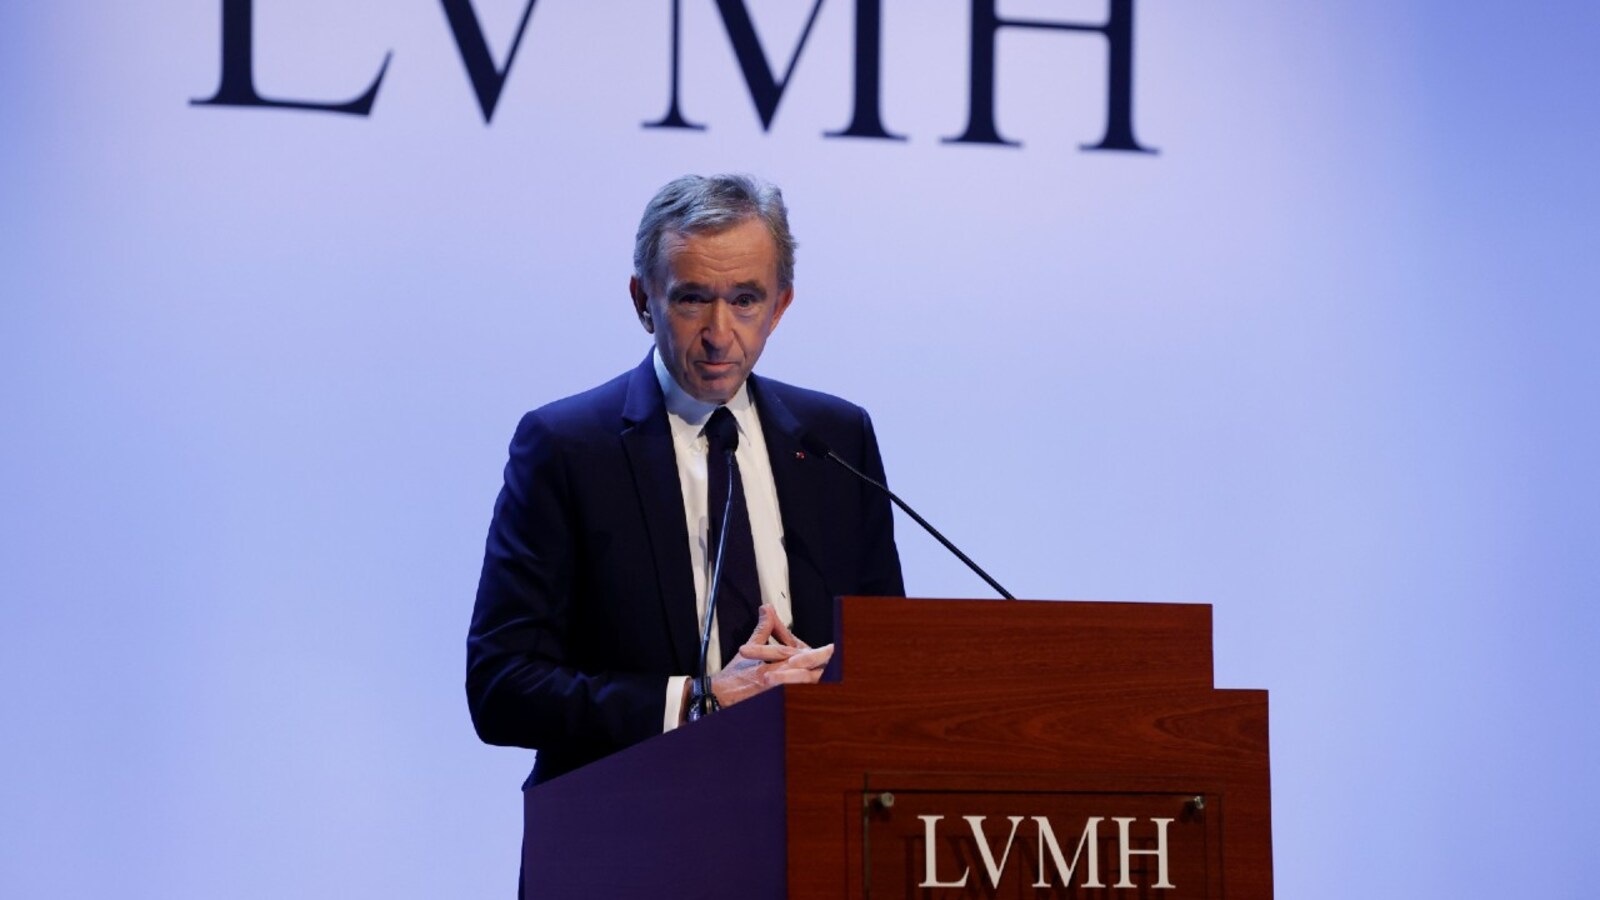 Bernard Arnault Is Now the World's Richest Person. Thanks China?